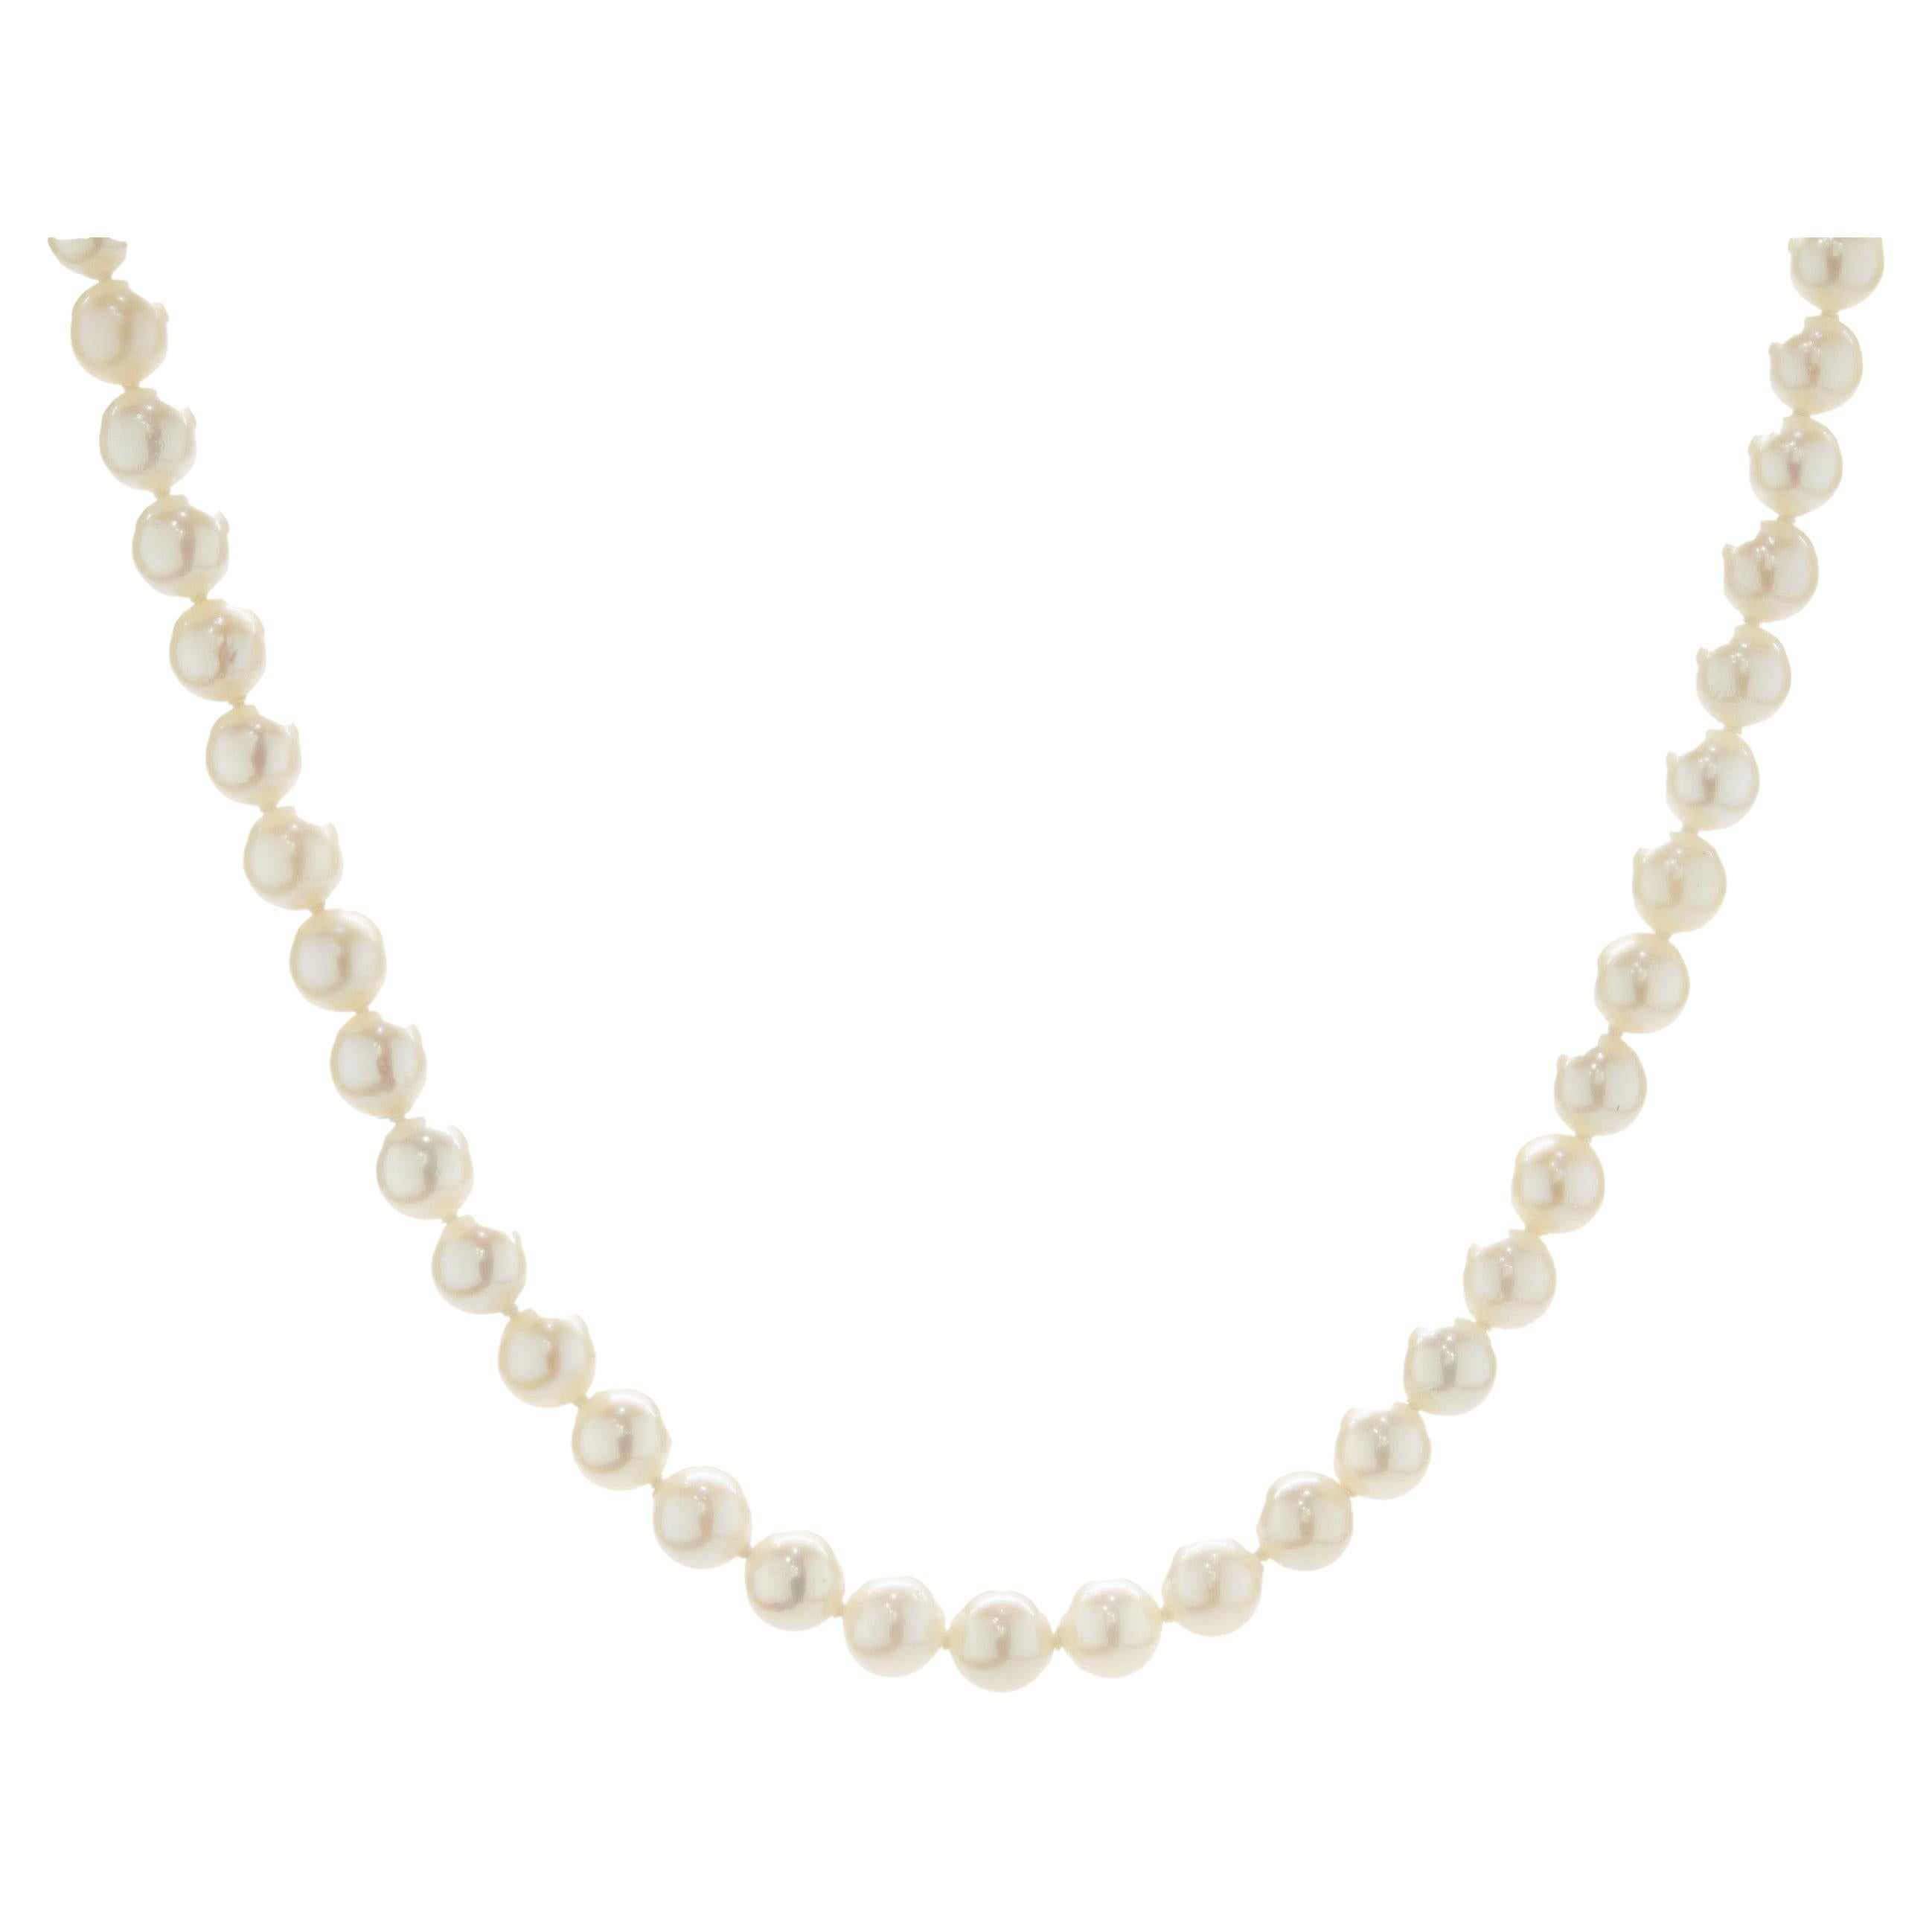 Freshwater Pearl Necklace with 14 Karat Yellow Gold Clasp For Sale